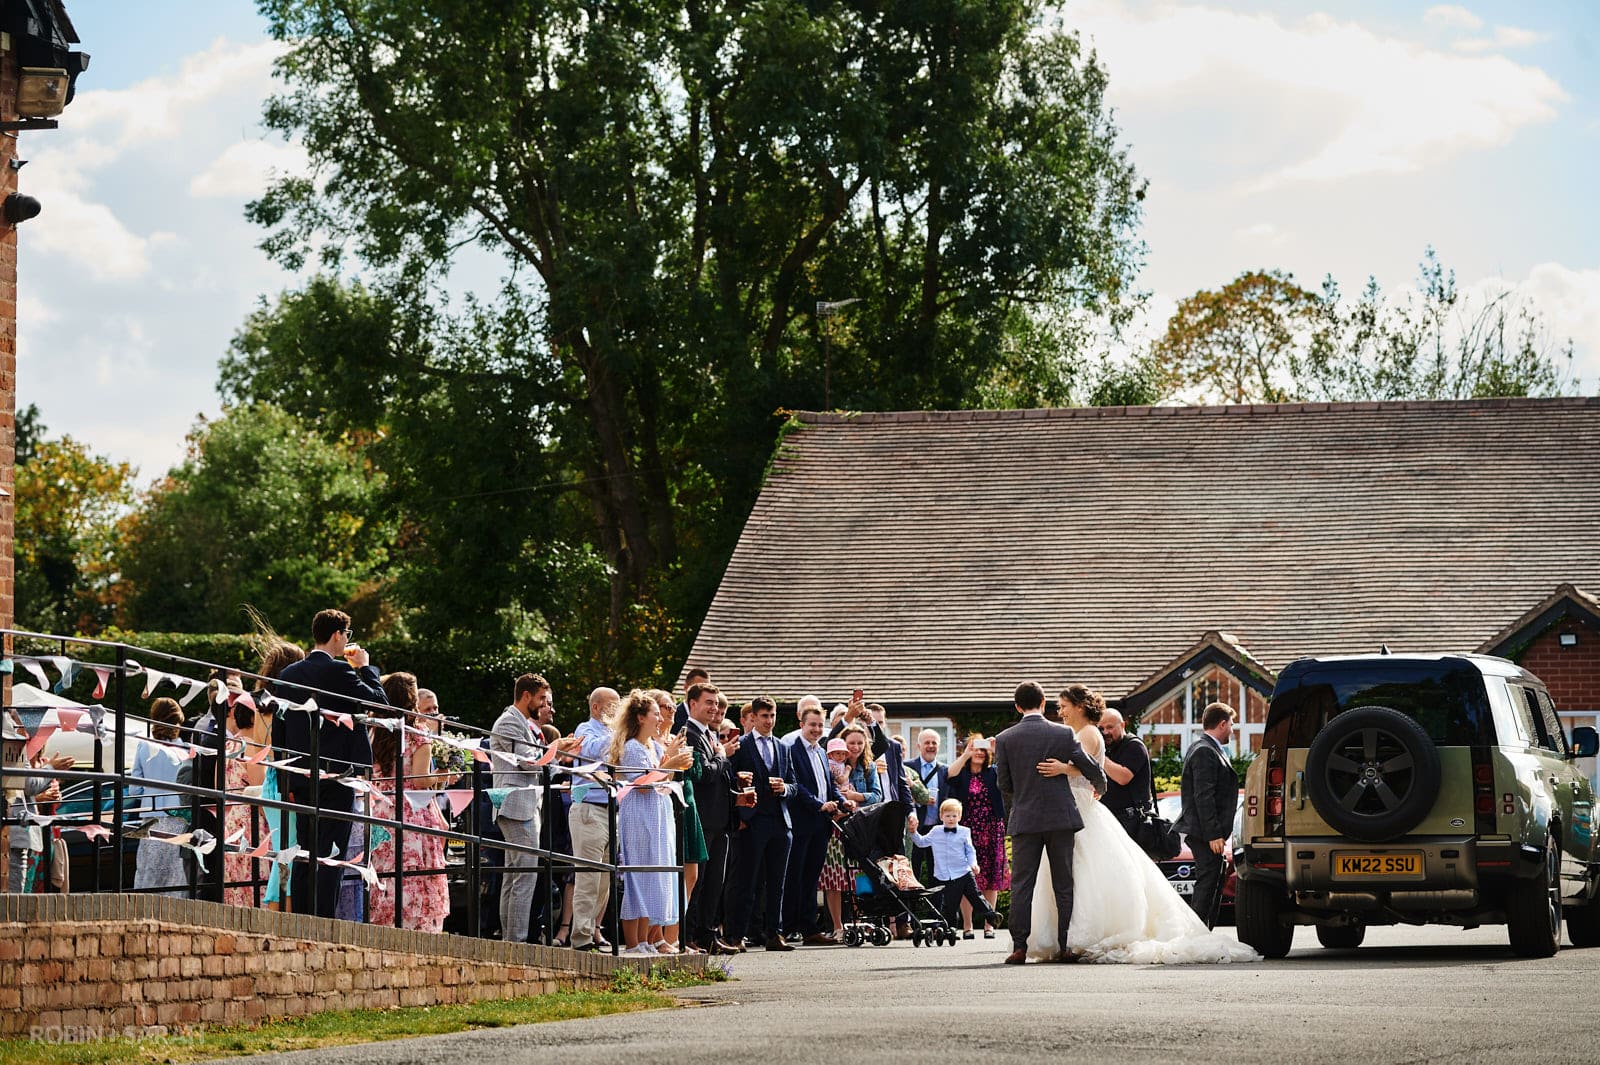 Bride and groom arrive at village hall for wedding reception as guests clap and cheer